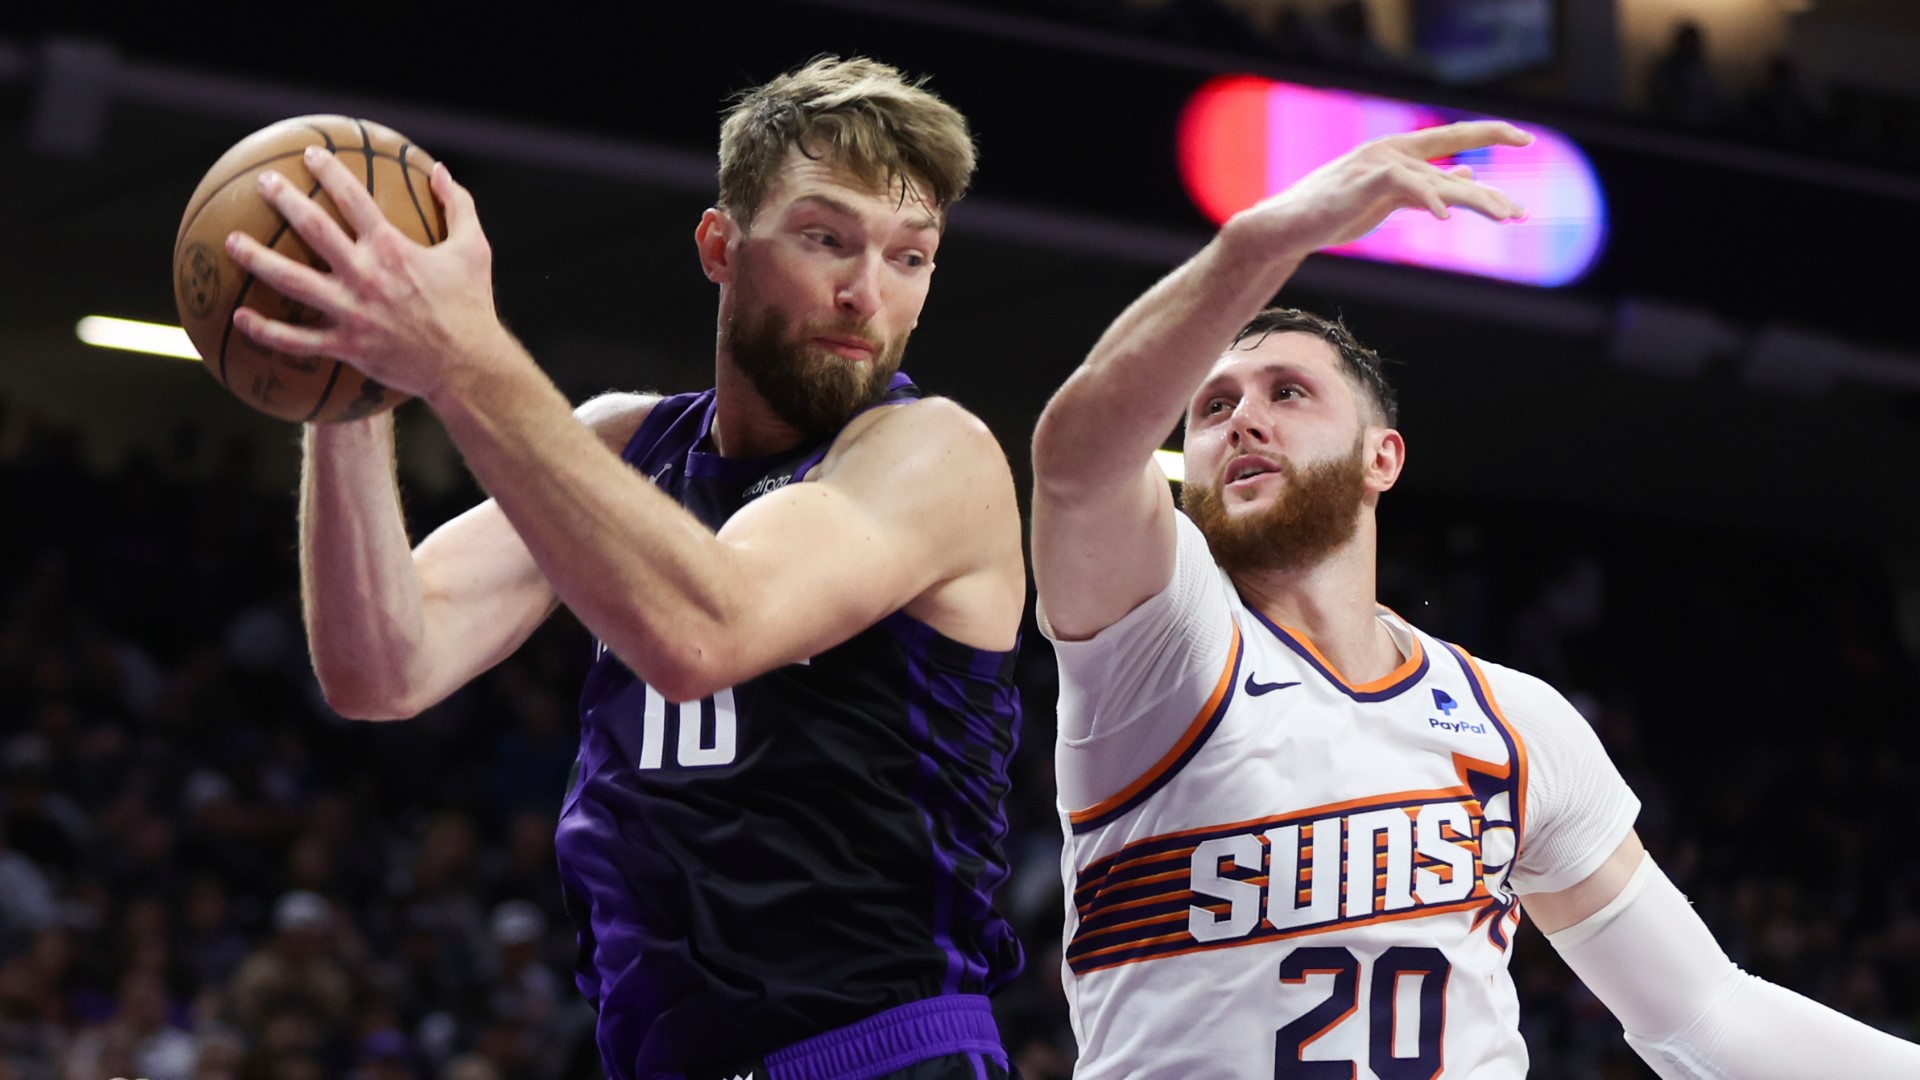 With the game tied 107 after Phoenix overcame a 16-point deficit, Domantas Sabonis fouled Nurkic fighting for the rebound off a missed shot by Grayson Allen